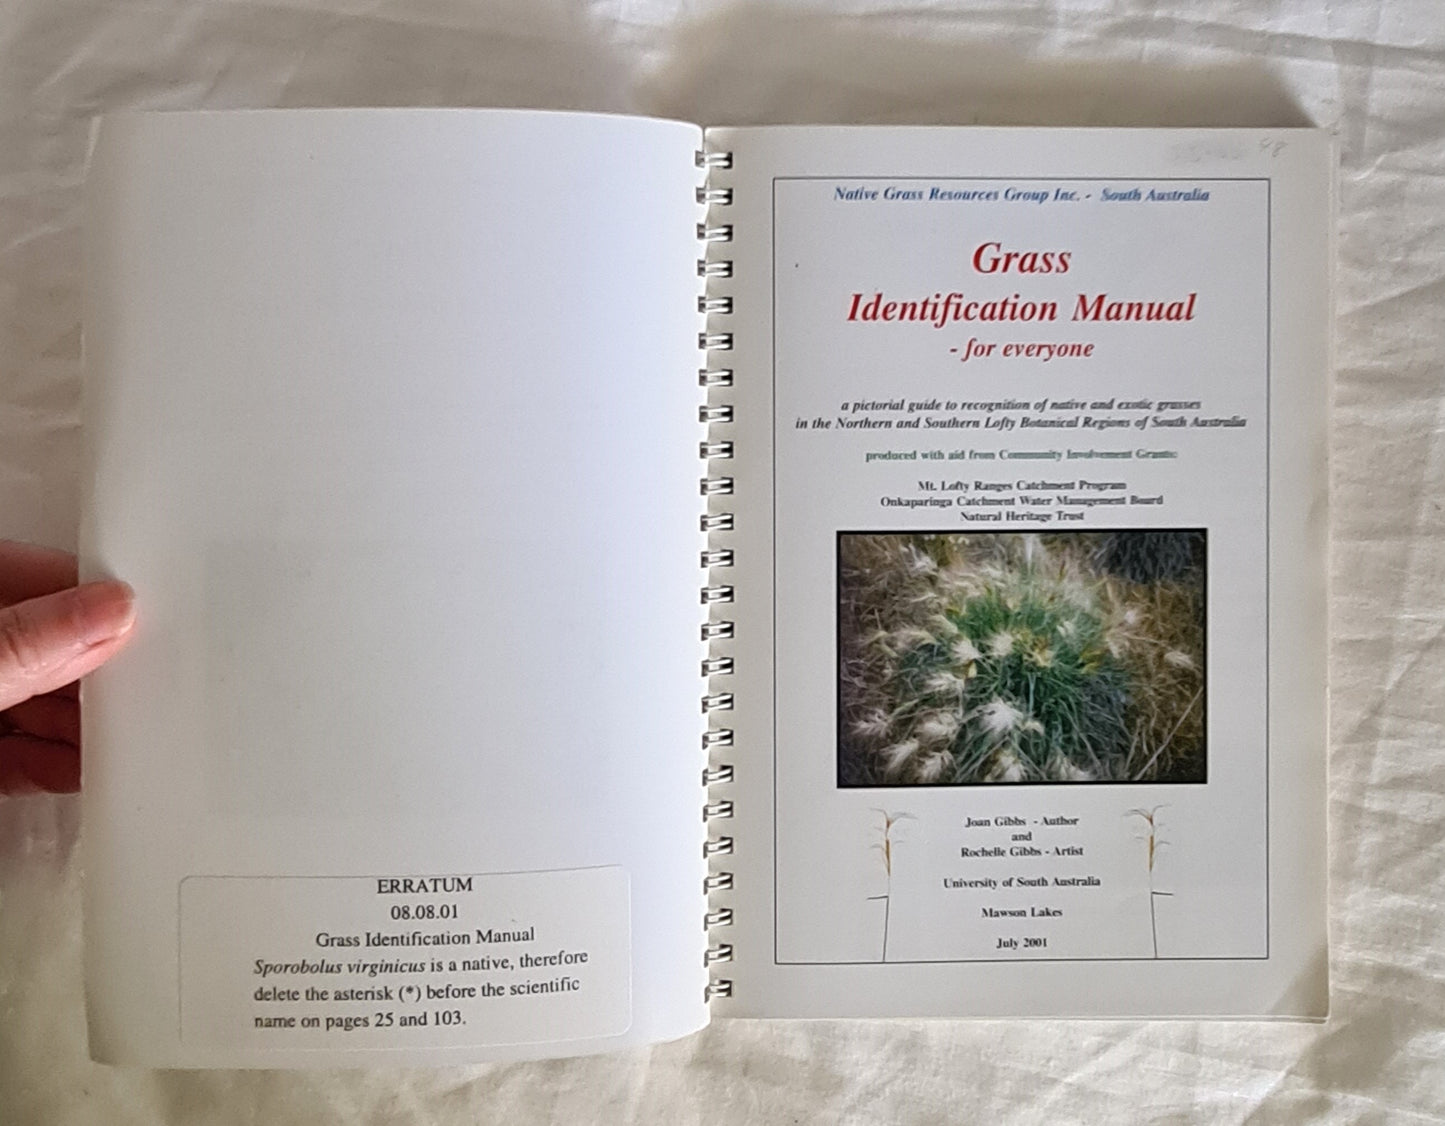 Grass Identification Manual – for everyone by Joan Gibbs